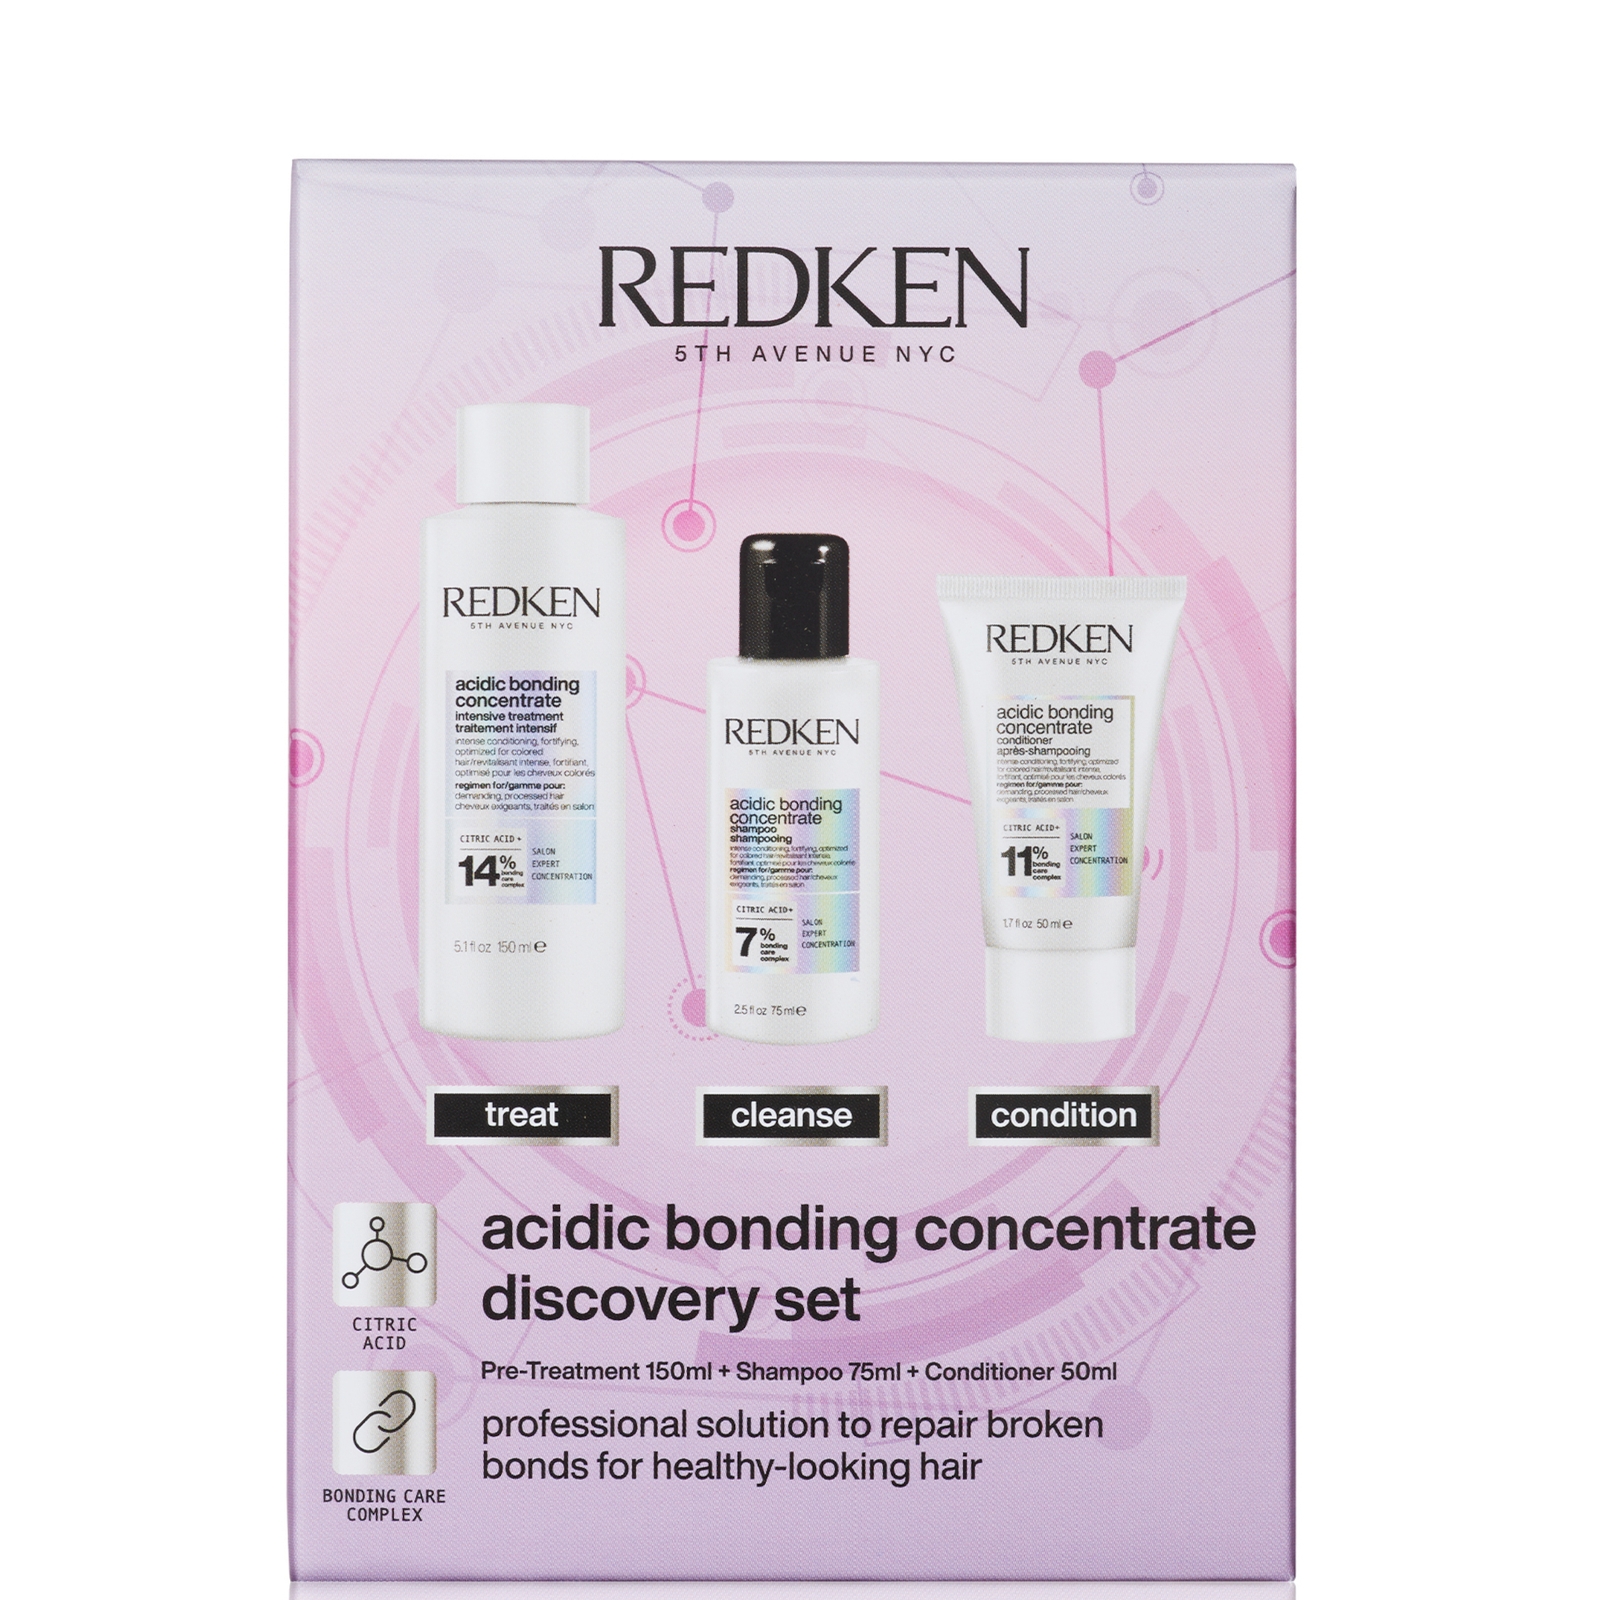 Redken Acidic Bonding Concentrate Bond Repair Pre-Treatment, Shampoo and Conditioner Discovery Gift 